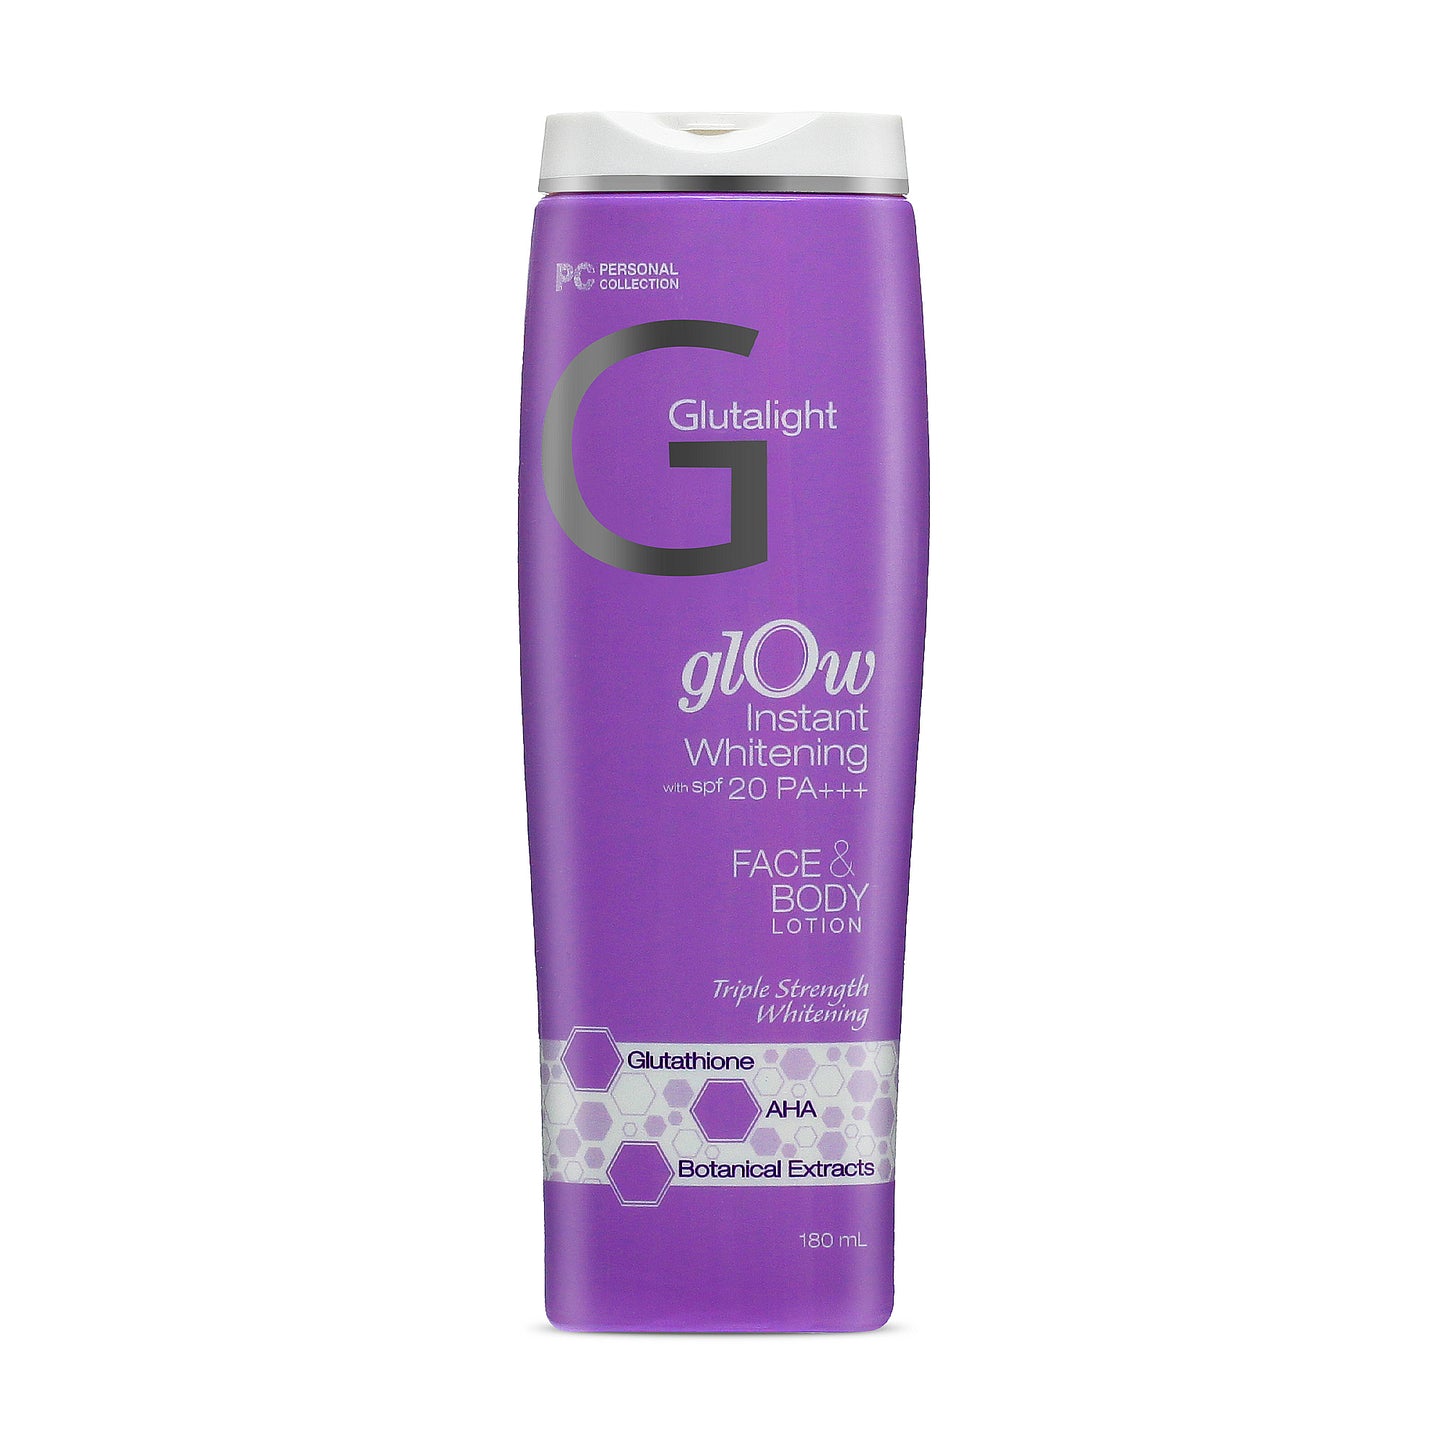 Glutalight Glow Instant Whitening Face & Body Lotion 180 mL